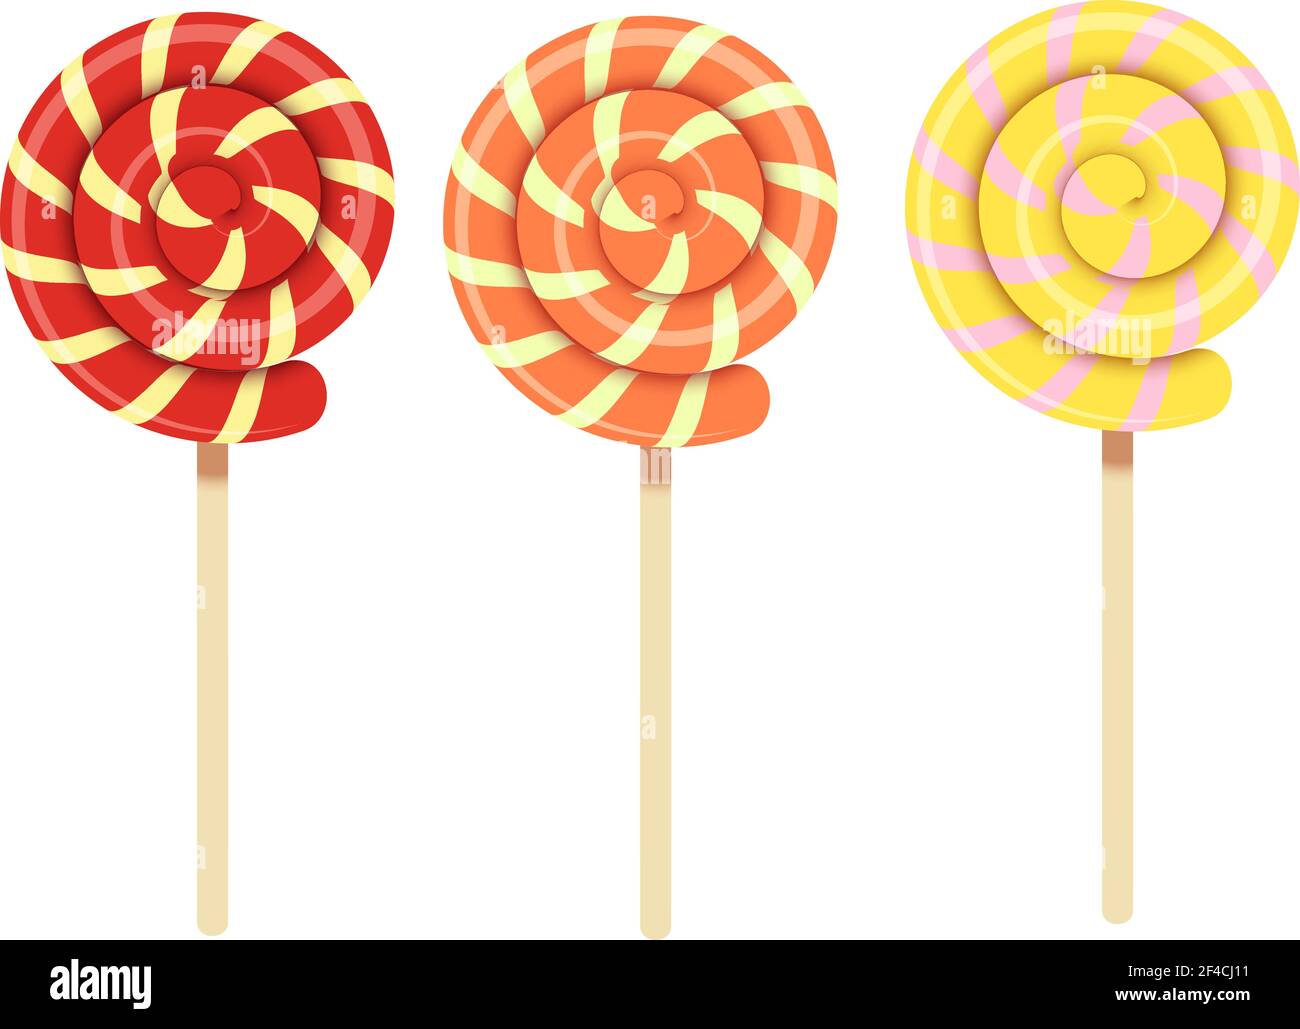 Vector illustration of multicolored spiral sweet lollipops. Fruit candy sweet dessert isolate on a white background Stock Vector